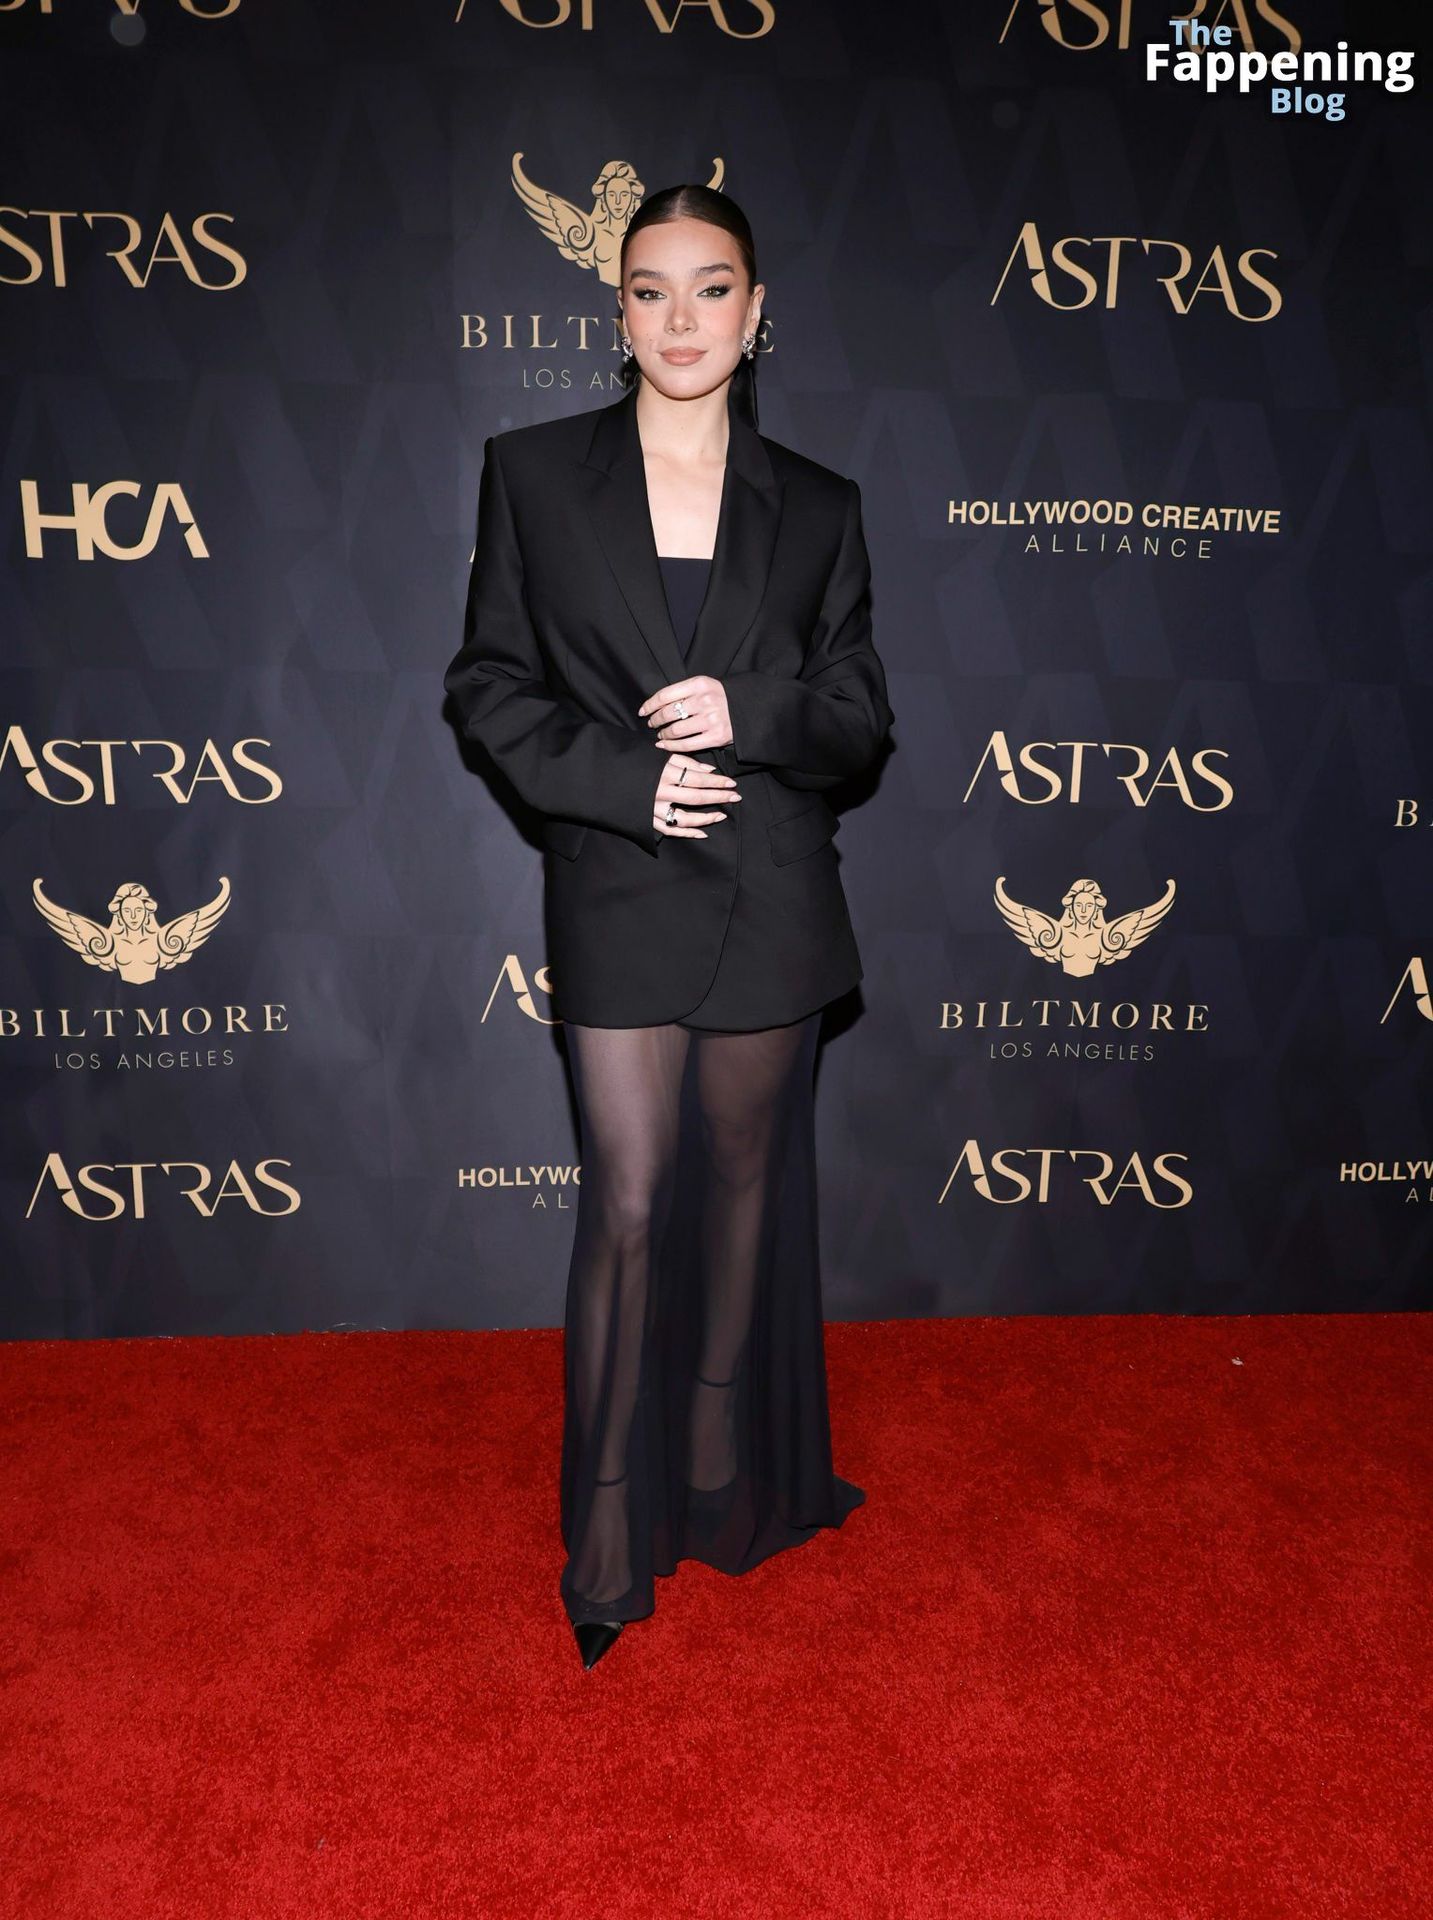 Hailee-Steinfeld-Black-Outfit-Astra-Film-Awards-7-thefappeningblog.com_.jpg